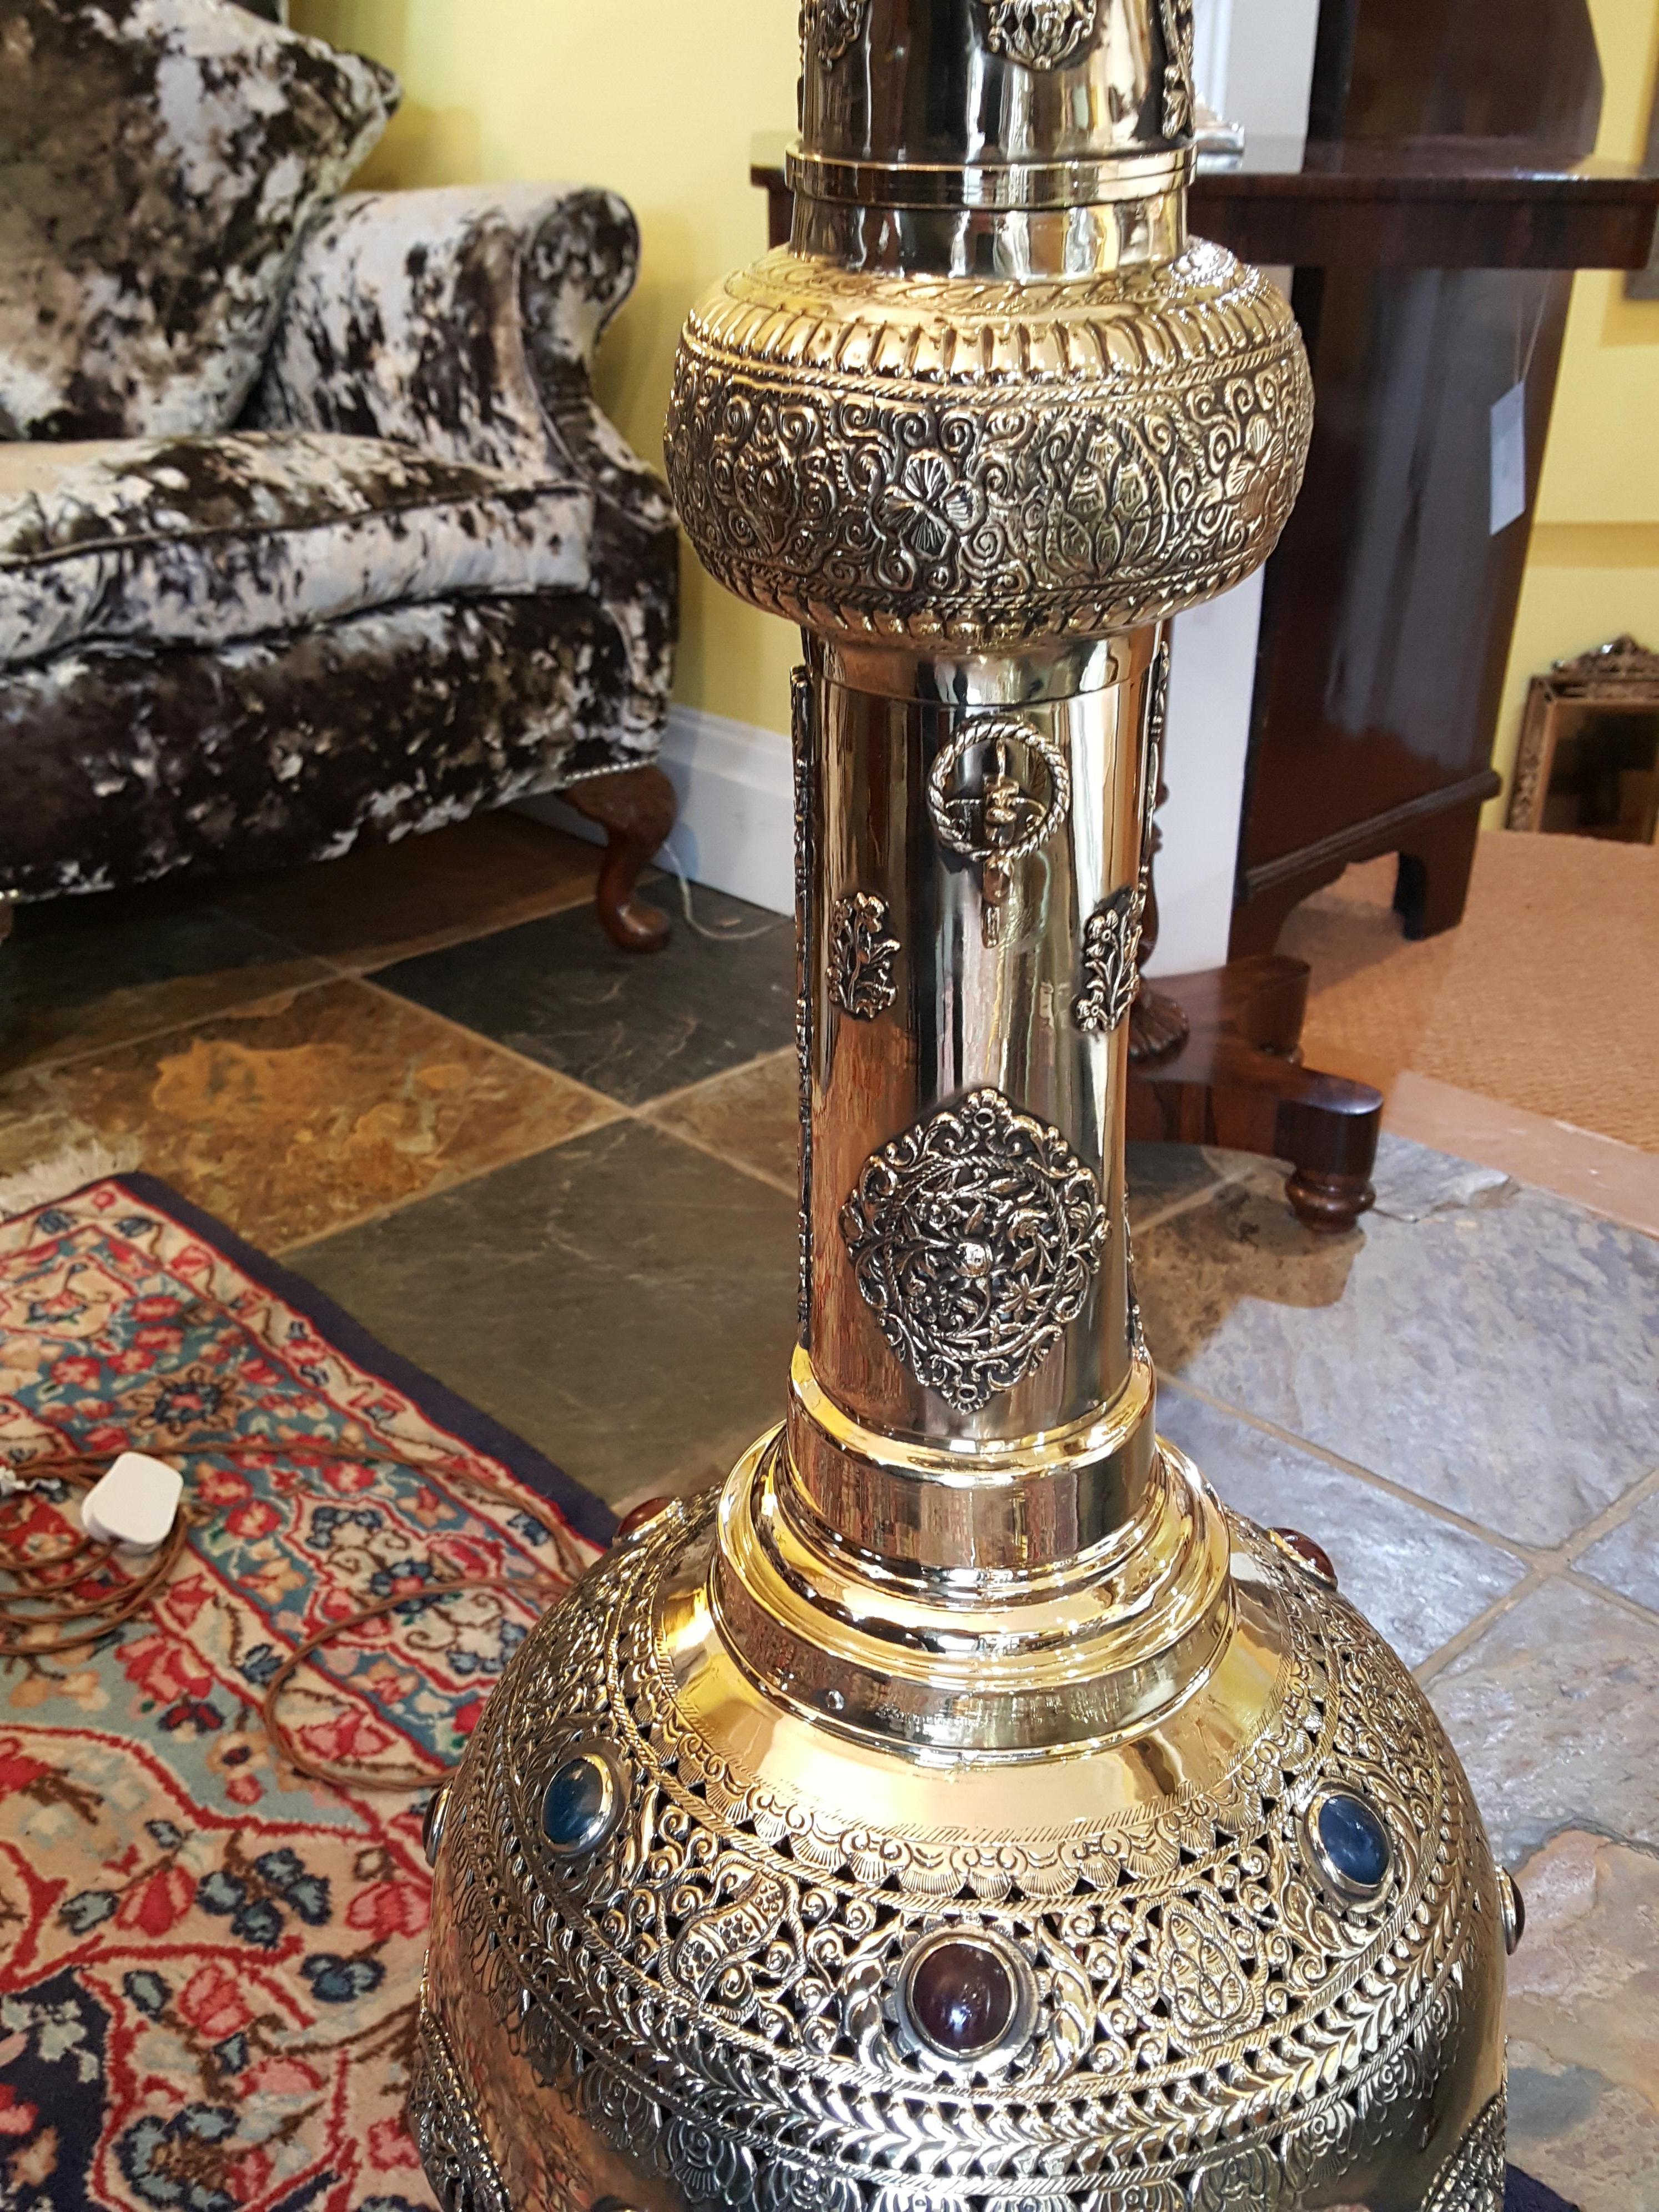 Late 19th century Persian pierced brass incense burner decorated with glass beads - converted to electric lamp - all lights and lamps have been rewired with authentic corded flex, fitted with either foot switch or finger clicker switch and are PAT